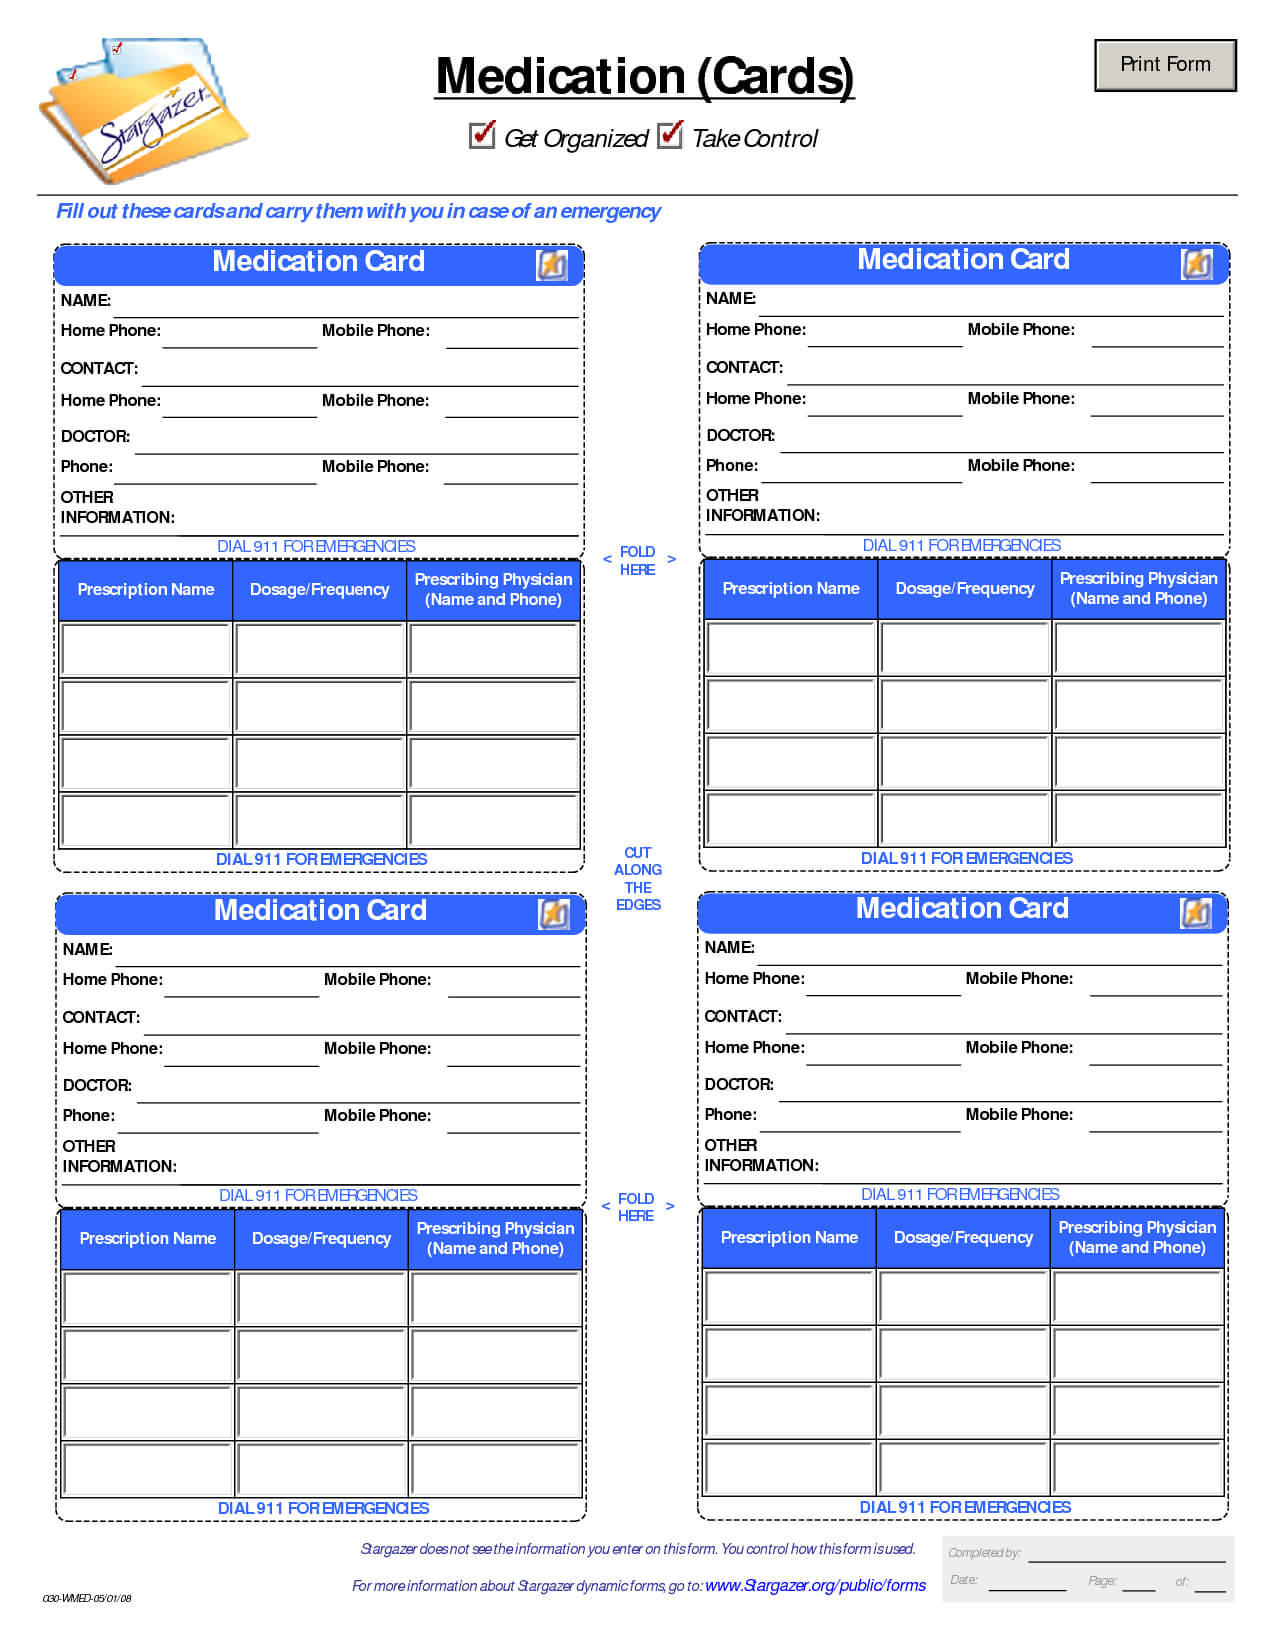 Patient Medication Card Template | Medication List, Medical In In Case Of Emergency Card Template